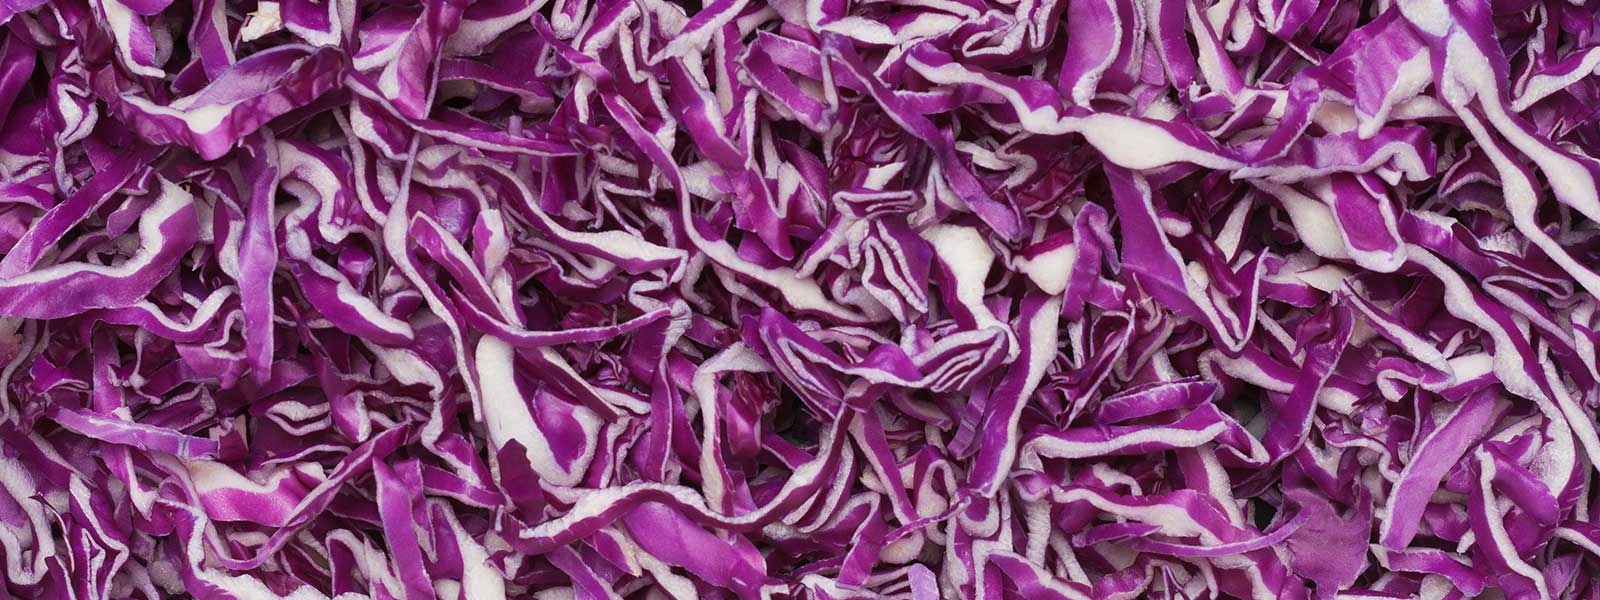 https://taylorfarmsfoodservice.com/wp-content/uploads/2017/05/Shredded-Red-Cabbage.jpg